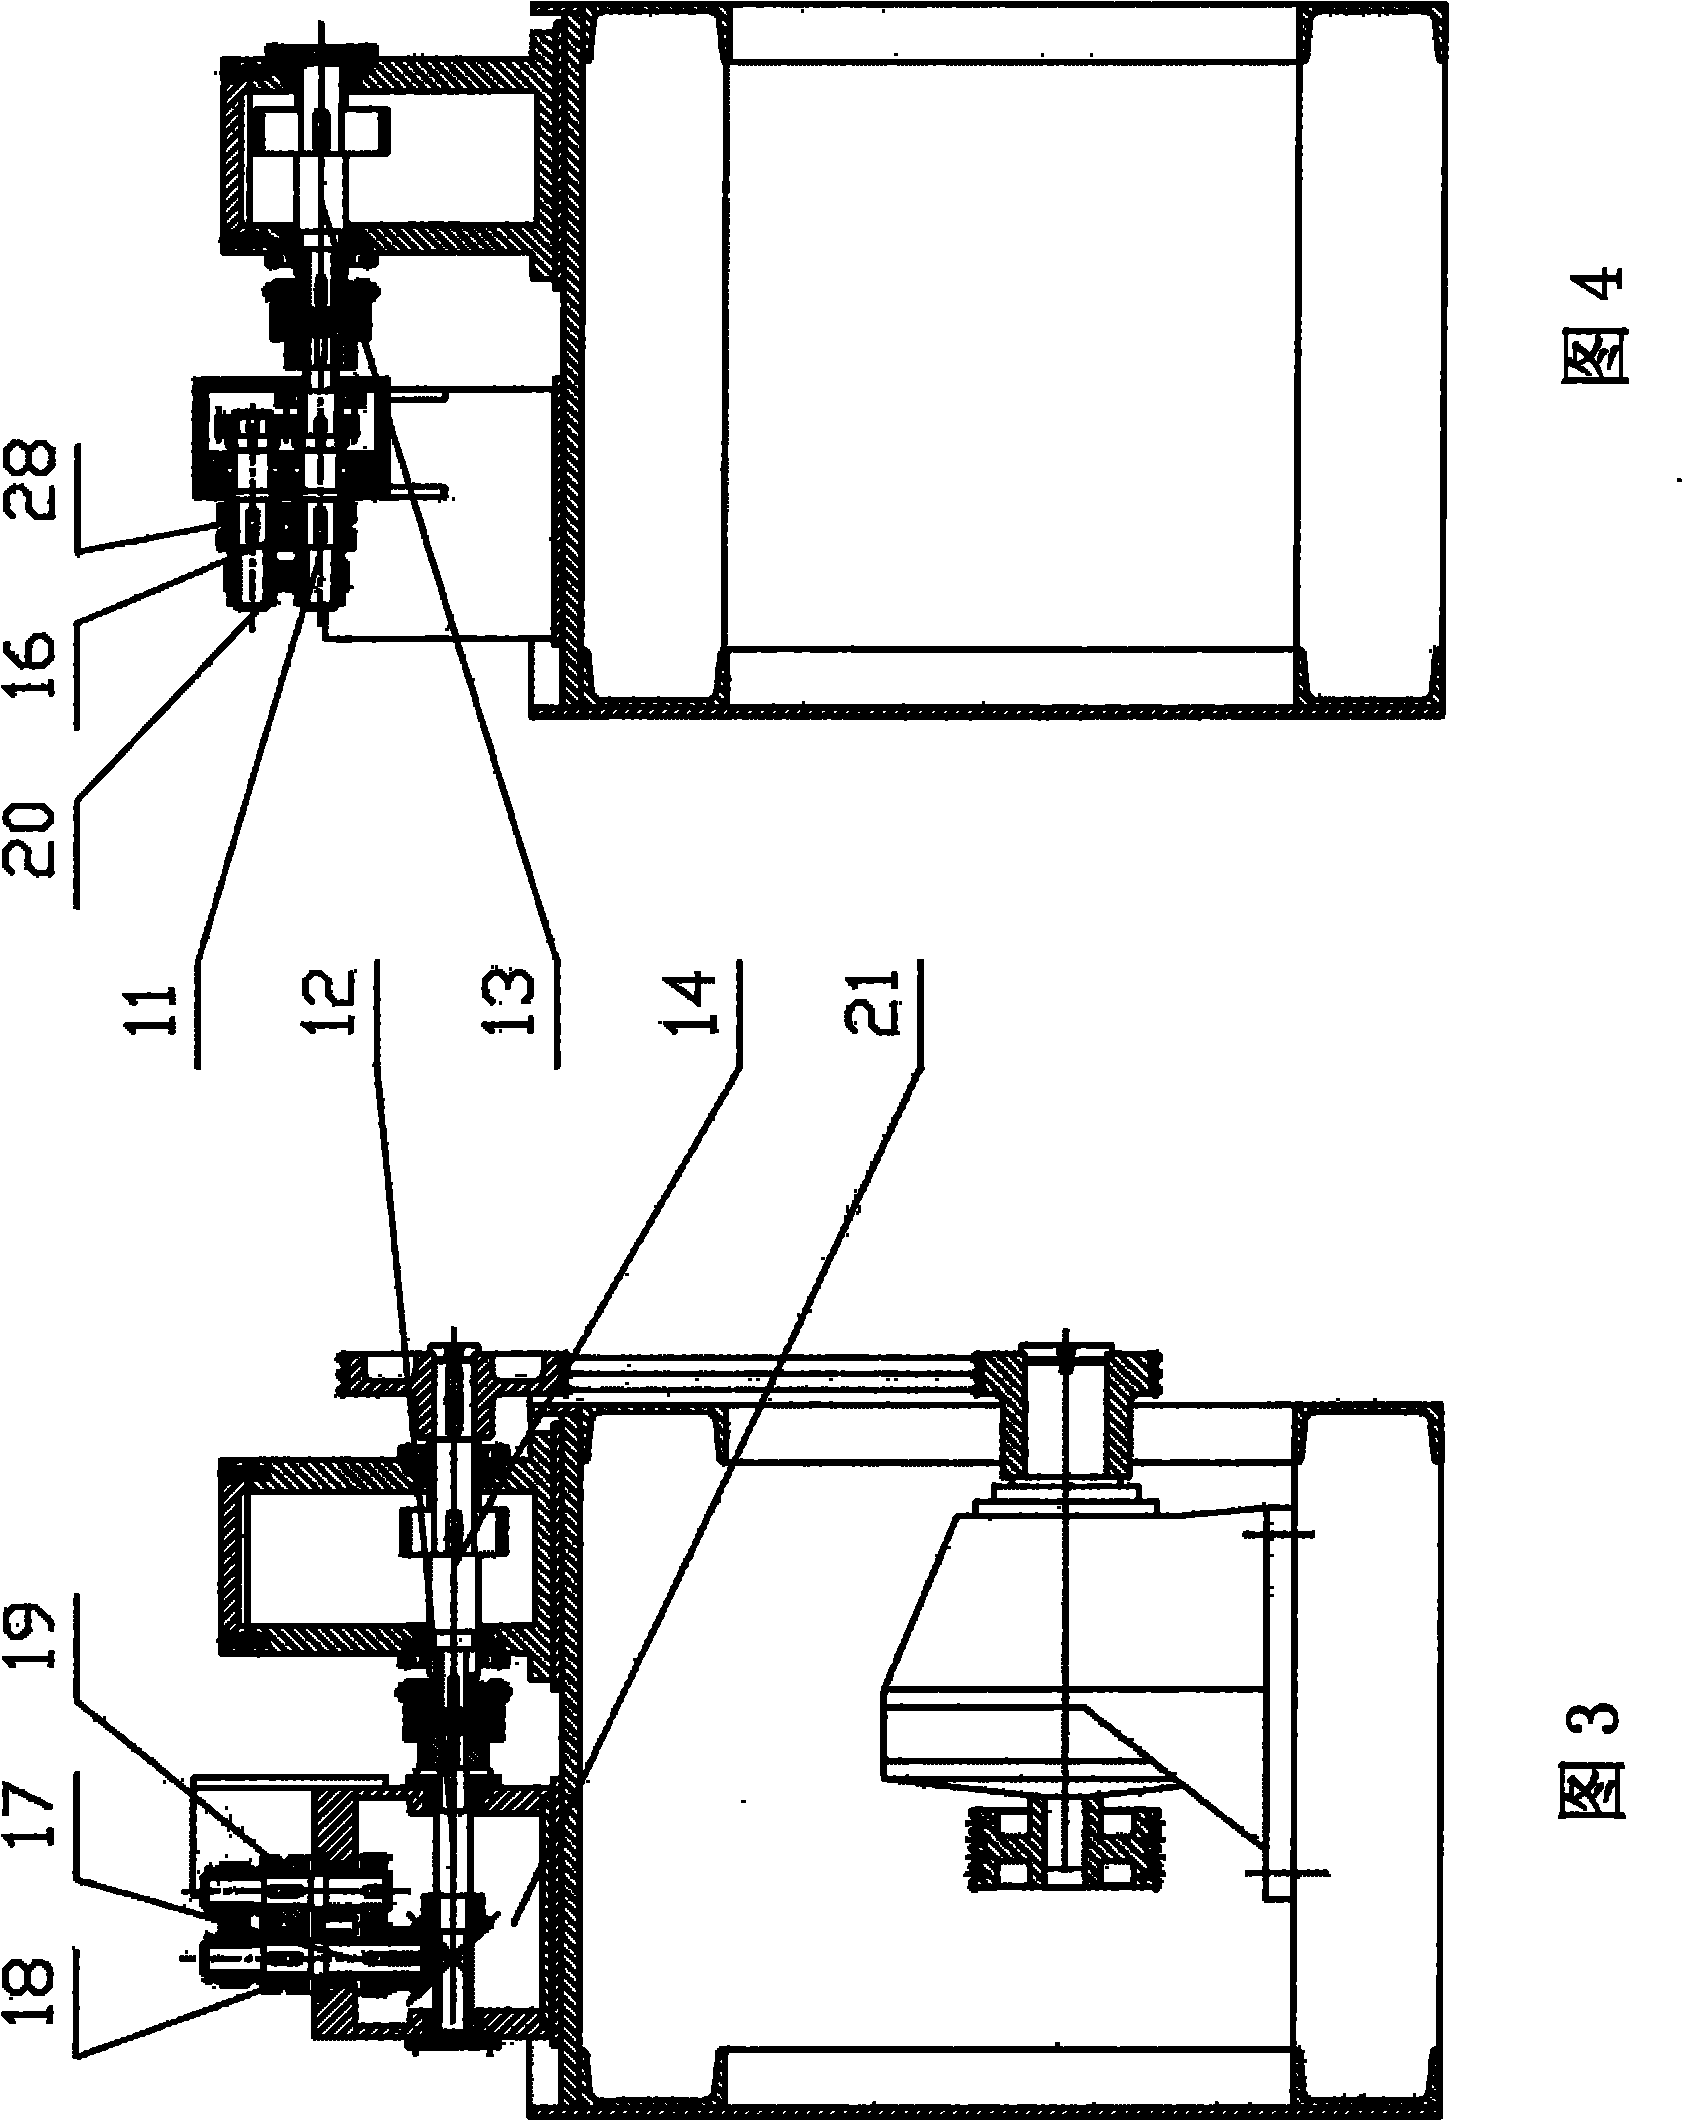 Two-roll wire rolling mill